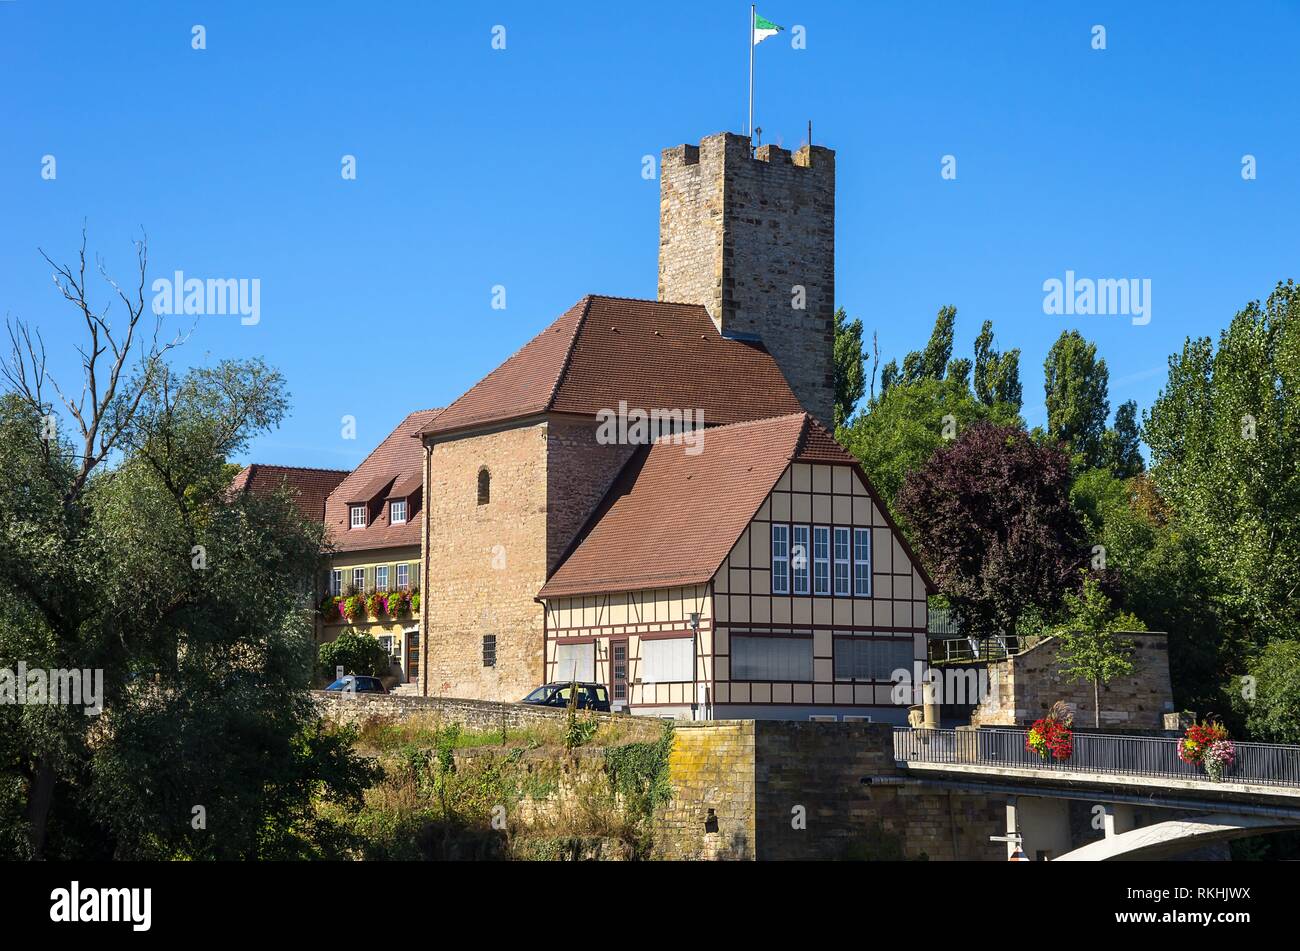 The Grafenburg Castle and townhall of the smalltown of Lauffen, Baden-Wurttemberg, Germany. Stock Photo